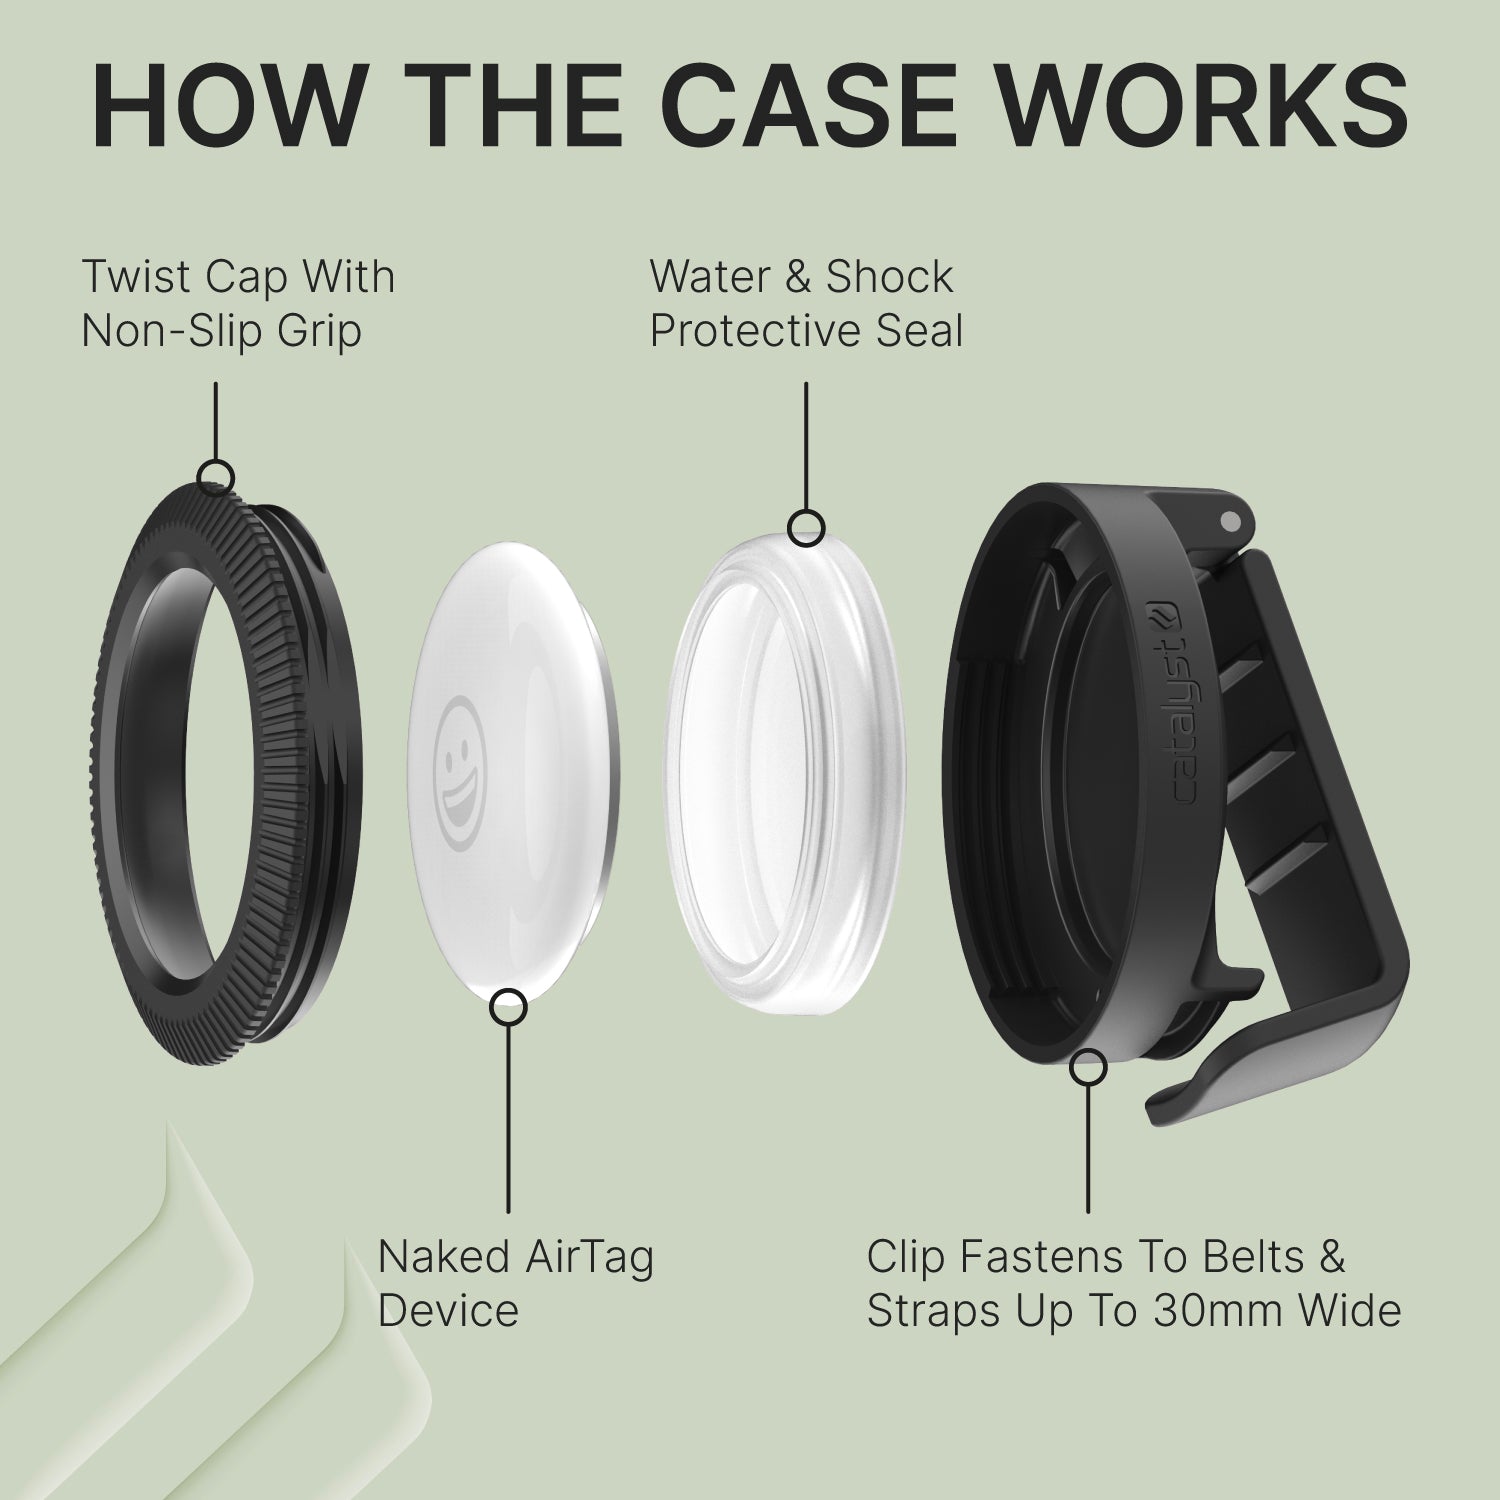 Catalyst total protection clip it how the case works Text reads twist cap with non-slip grip water & shock protective seal naked airtag device clip fastens to belts & straps up to 30mm wide